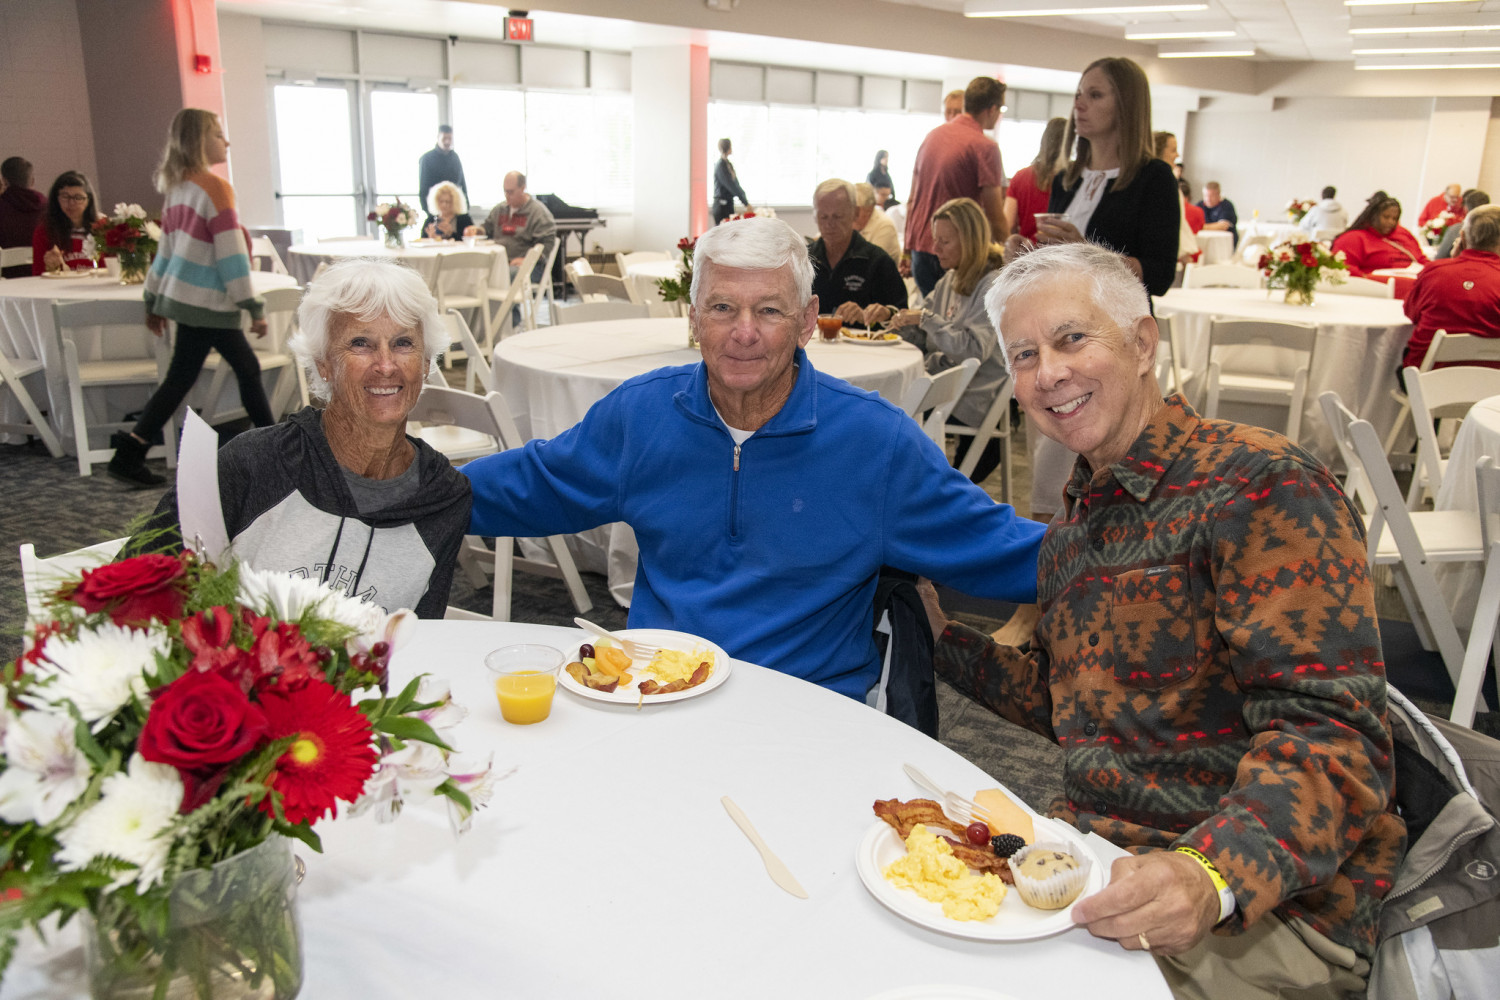 Alumni and family members gathered for the Alumni and Family Brunch at Homecoming.